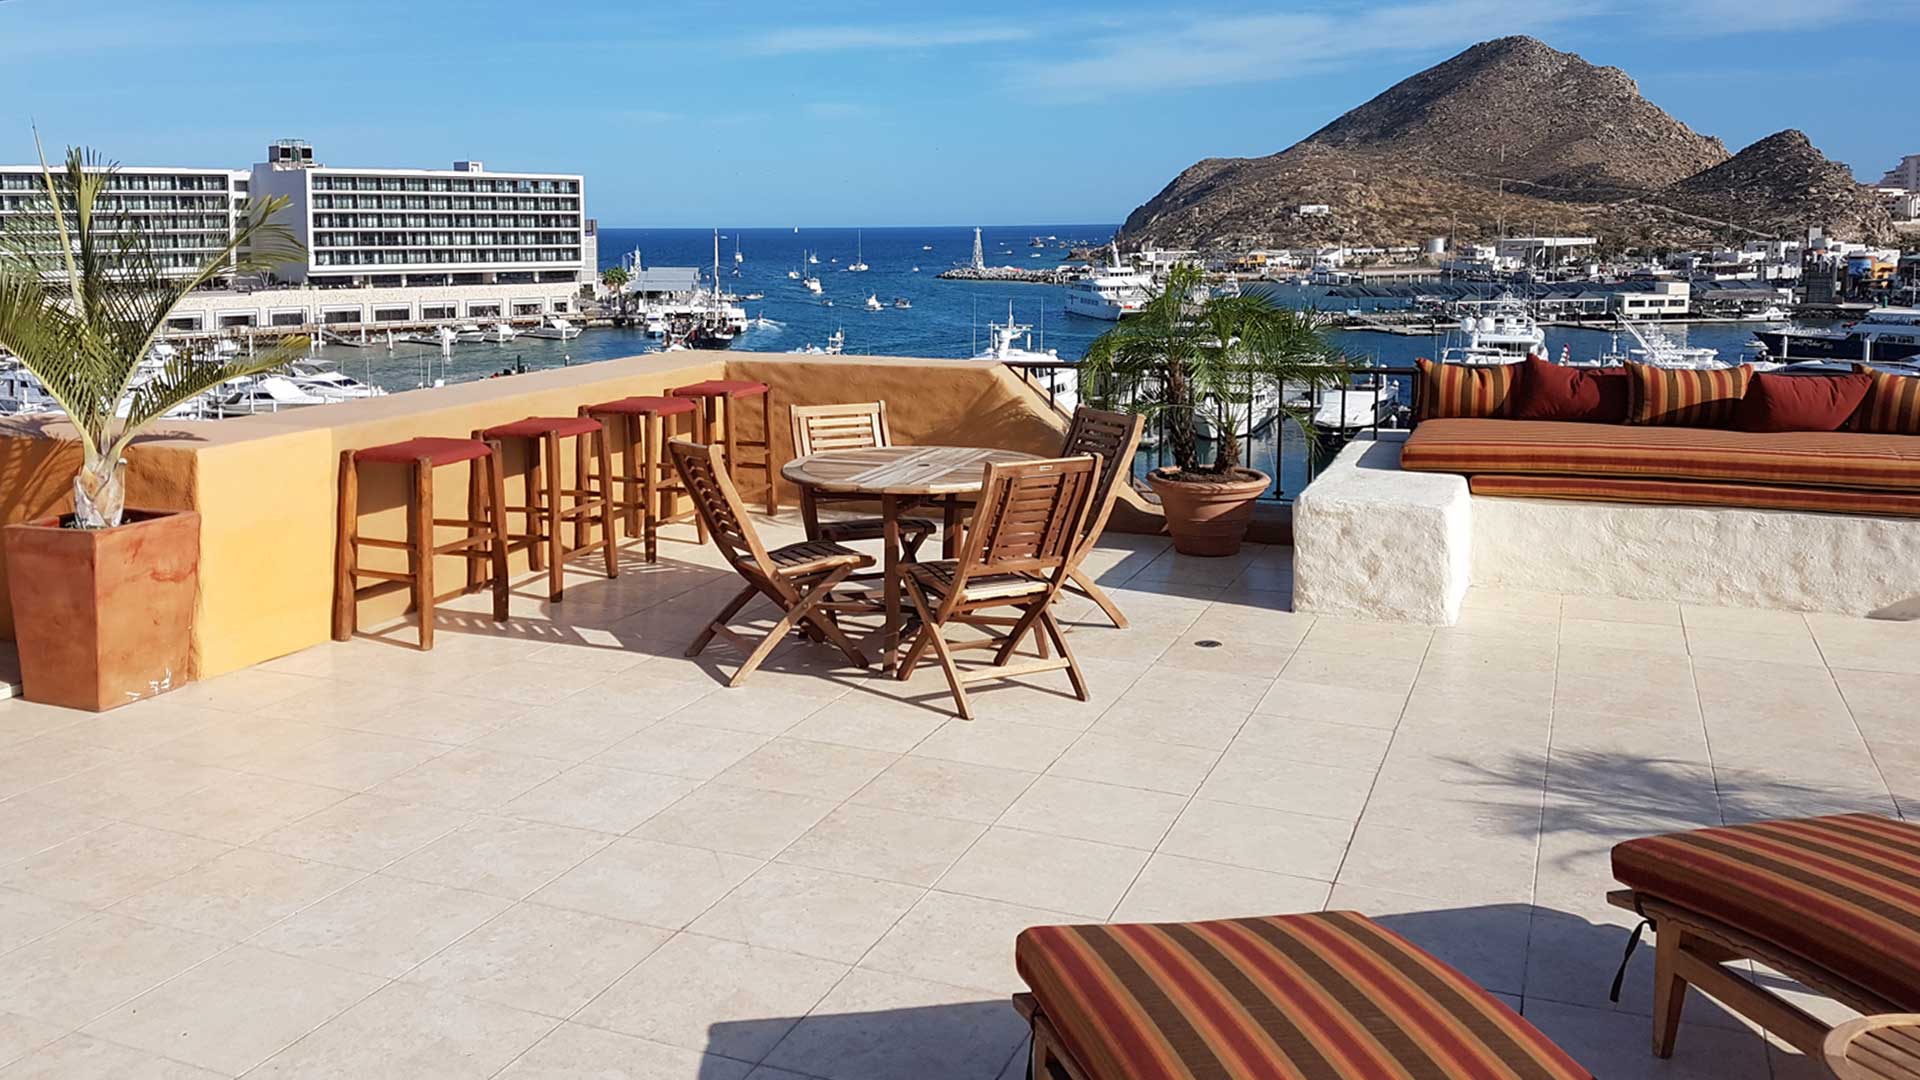 Penthouse condo on the Cabo Marina for sale